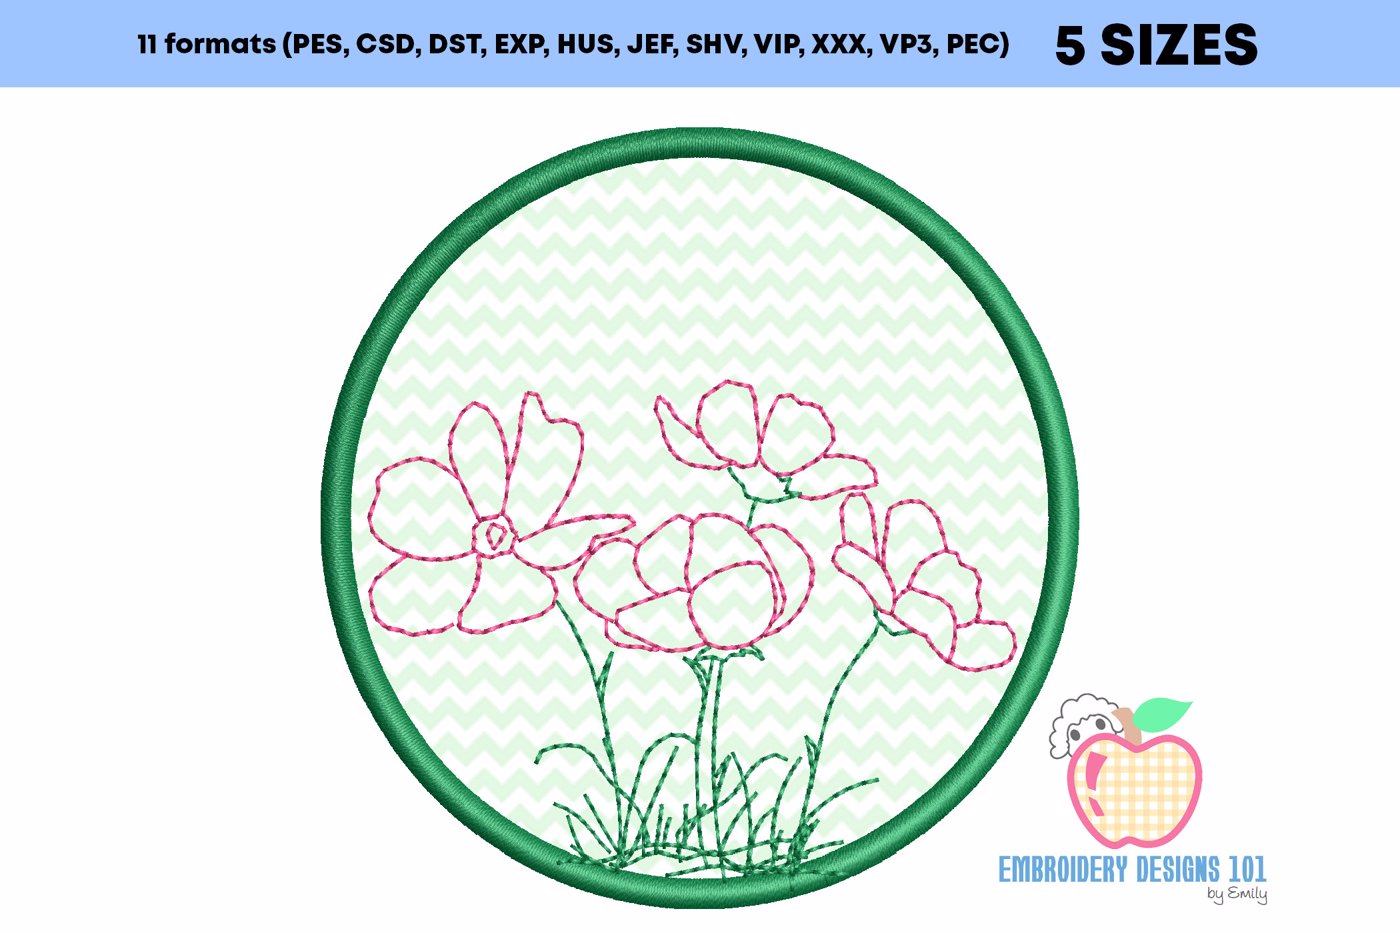 The Cosmea Flowers In The Circle Applique Pattern